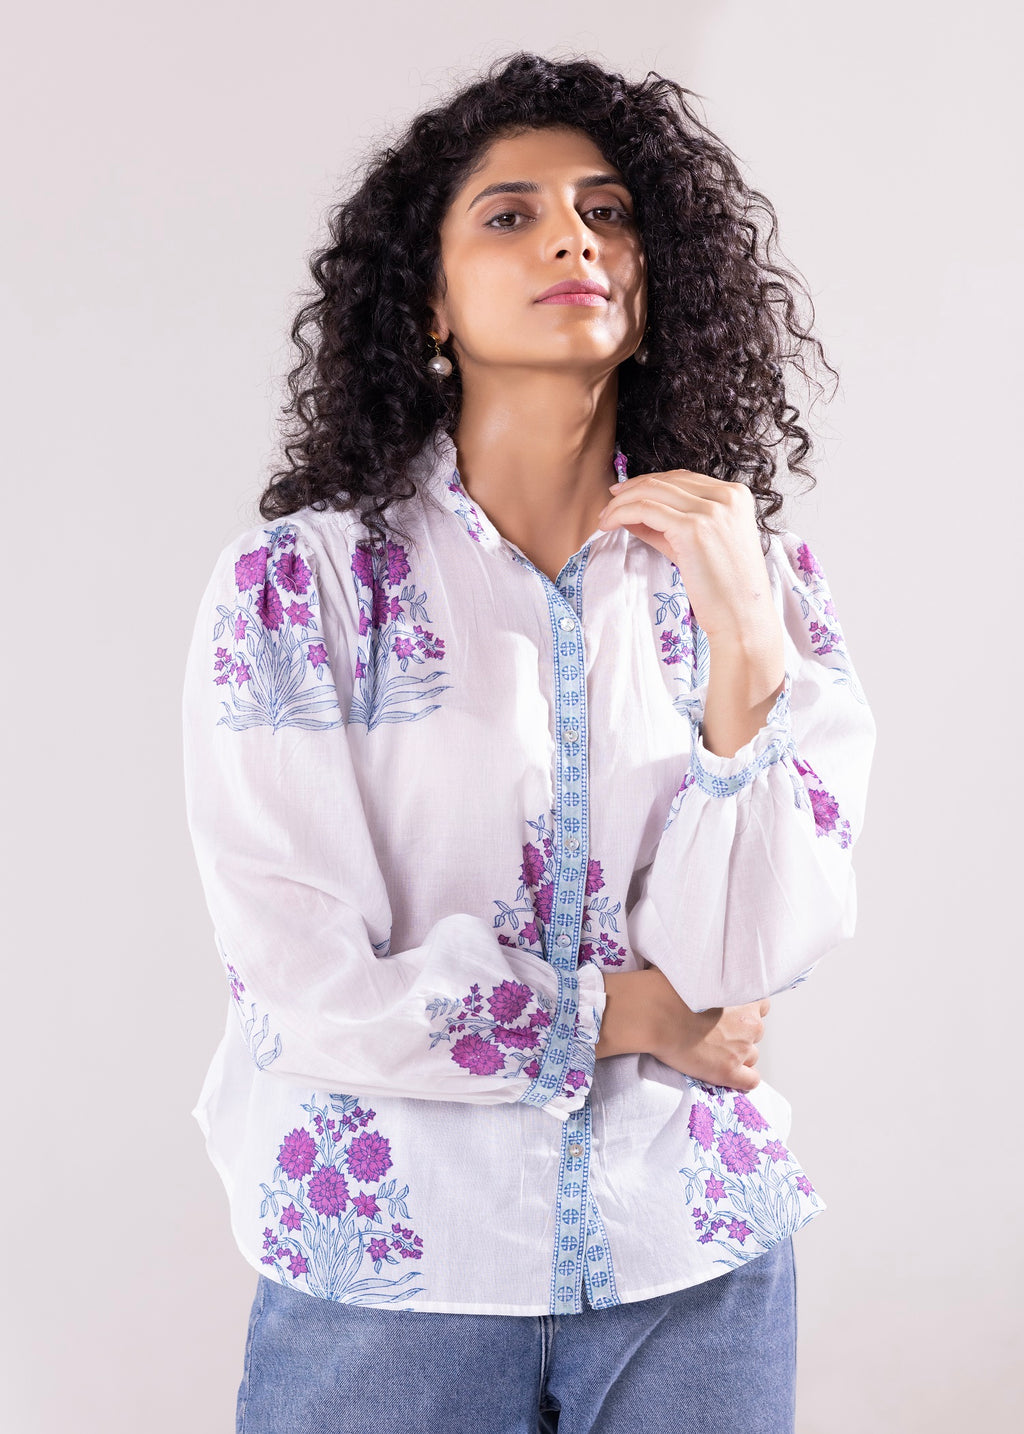 Shop Cotton jumpsuit shirts tops and tunics for women at R - Rajasthan - Jaipur ID1518447 2